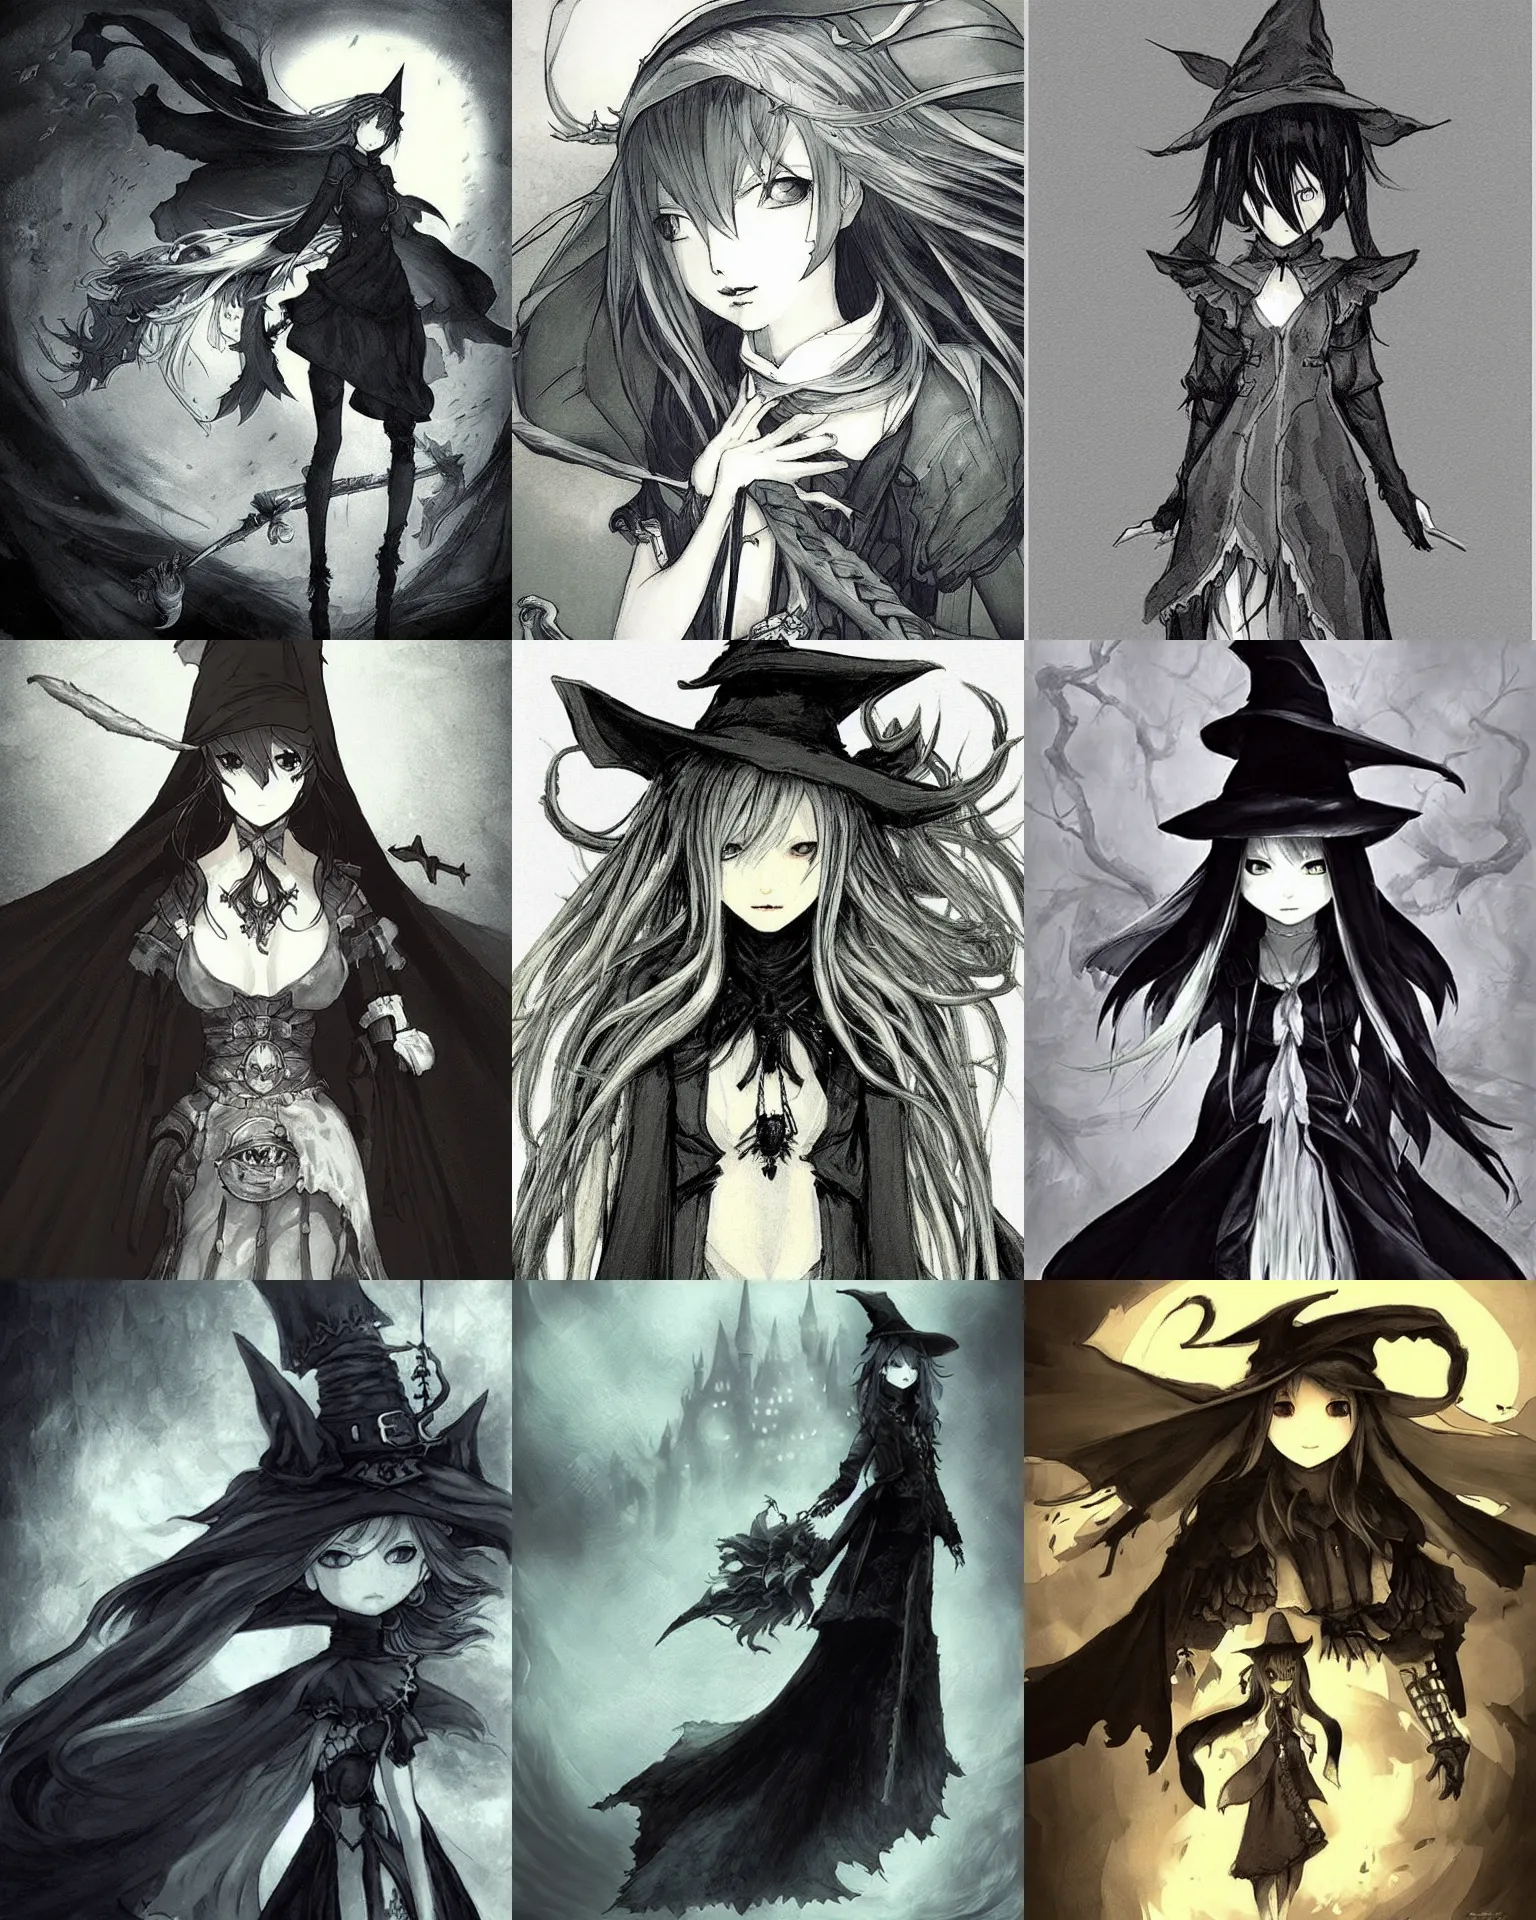 Prompt: “ art by akihiko yoshida's in his bravely default style, a young witch in black robes. concept art, detailed, gloomy. ”